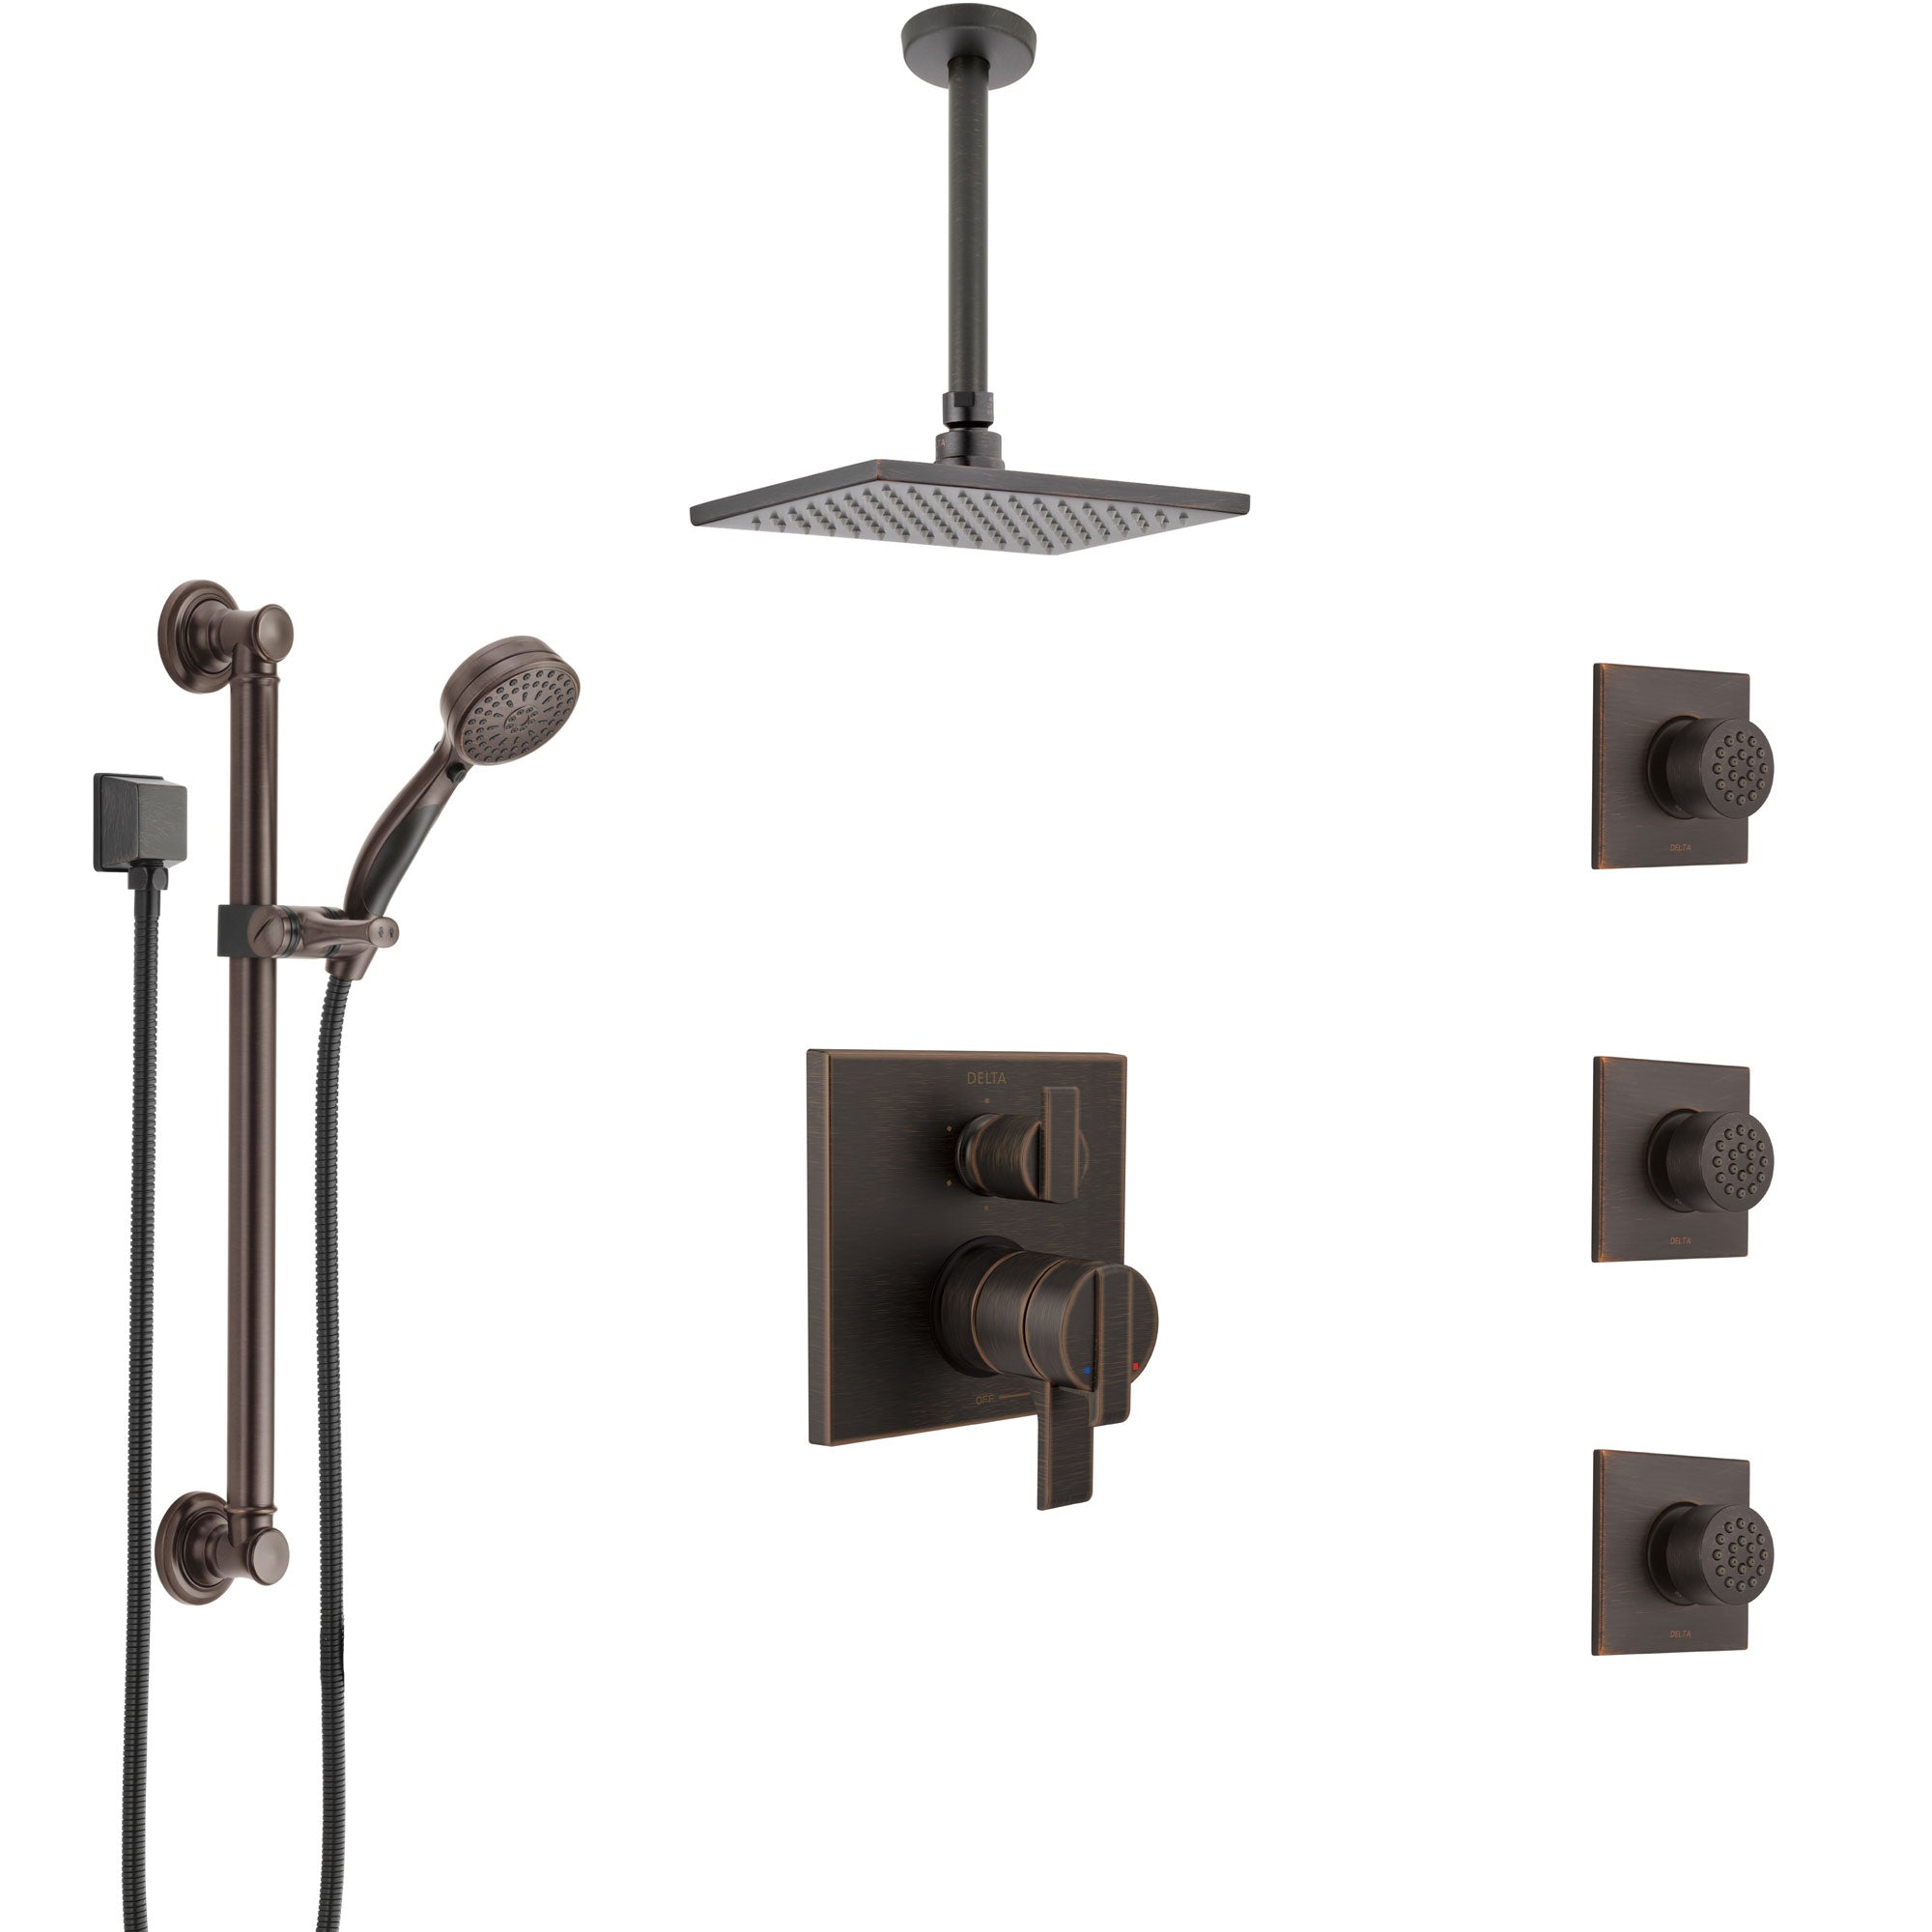 Delta Ara Venetian Bronze Shower System with Dual Control Handle, Integrated Diverter, Ceiling Showerhead, 3 Body Jets, Grab Bar Hand Spray SS27967RB1